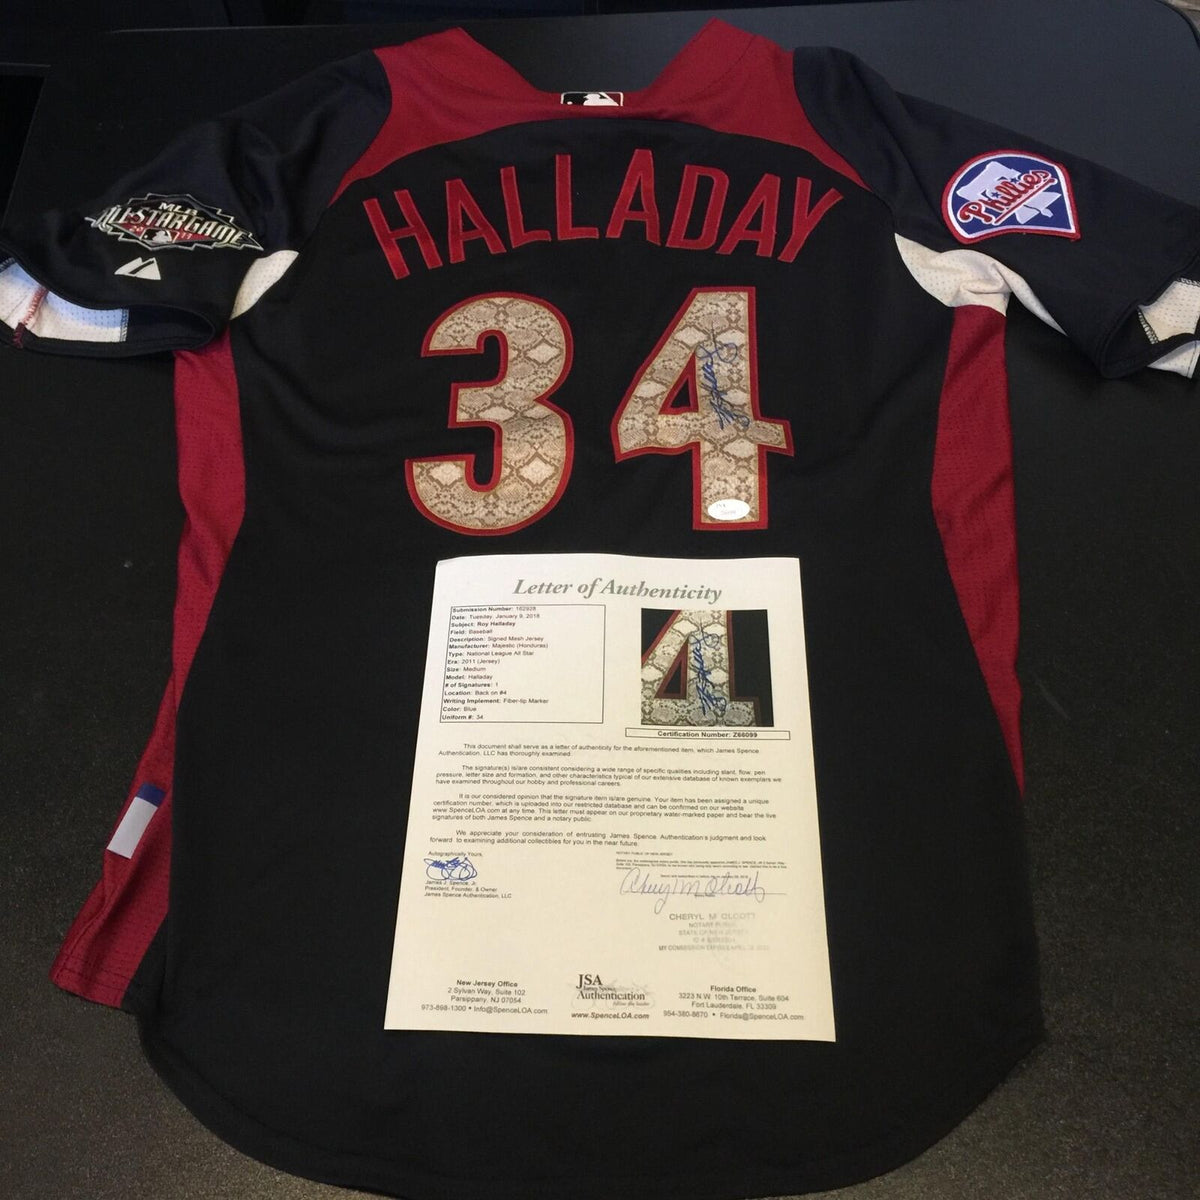 Roy Halladay Signed 2011 All Star Game Authentic Majestic Jersey